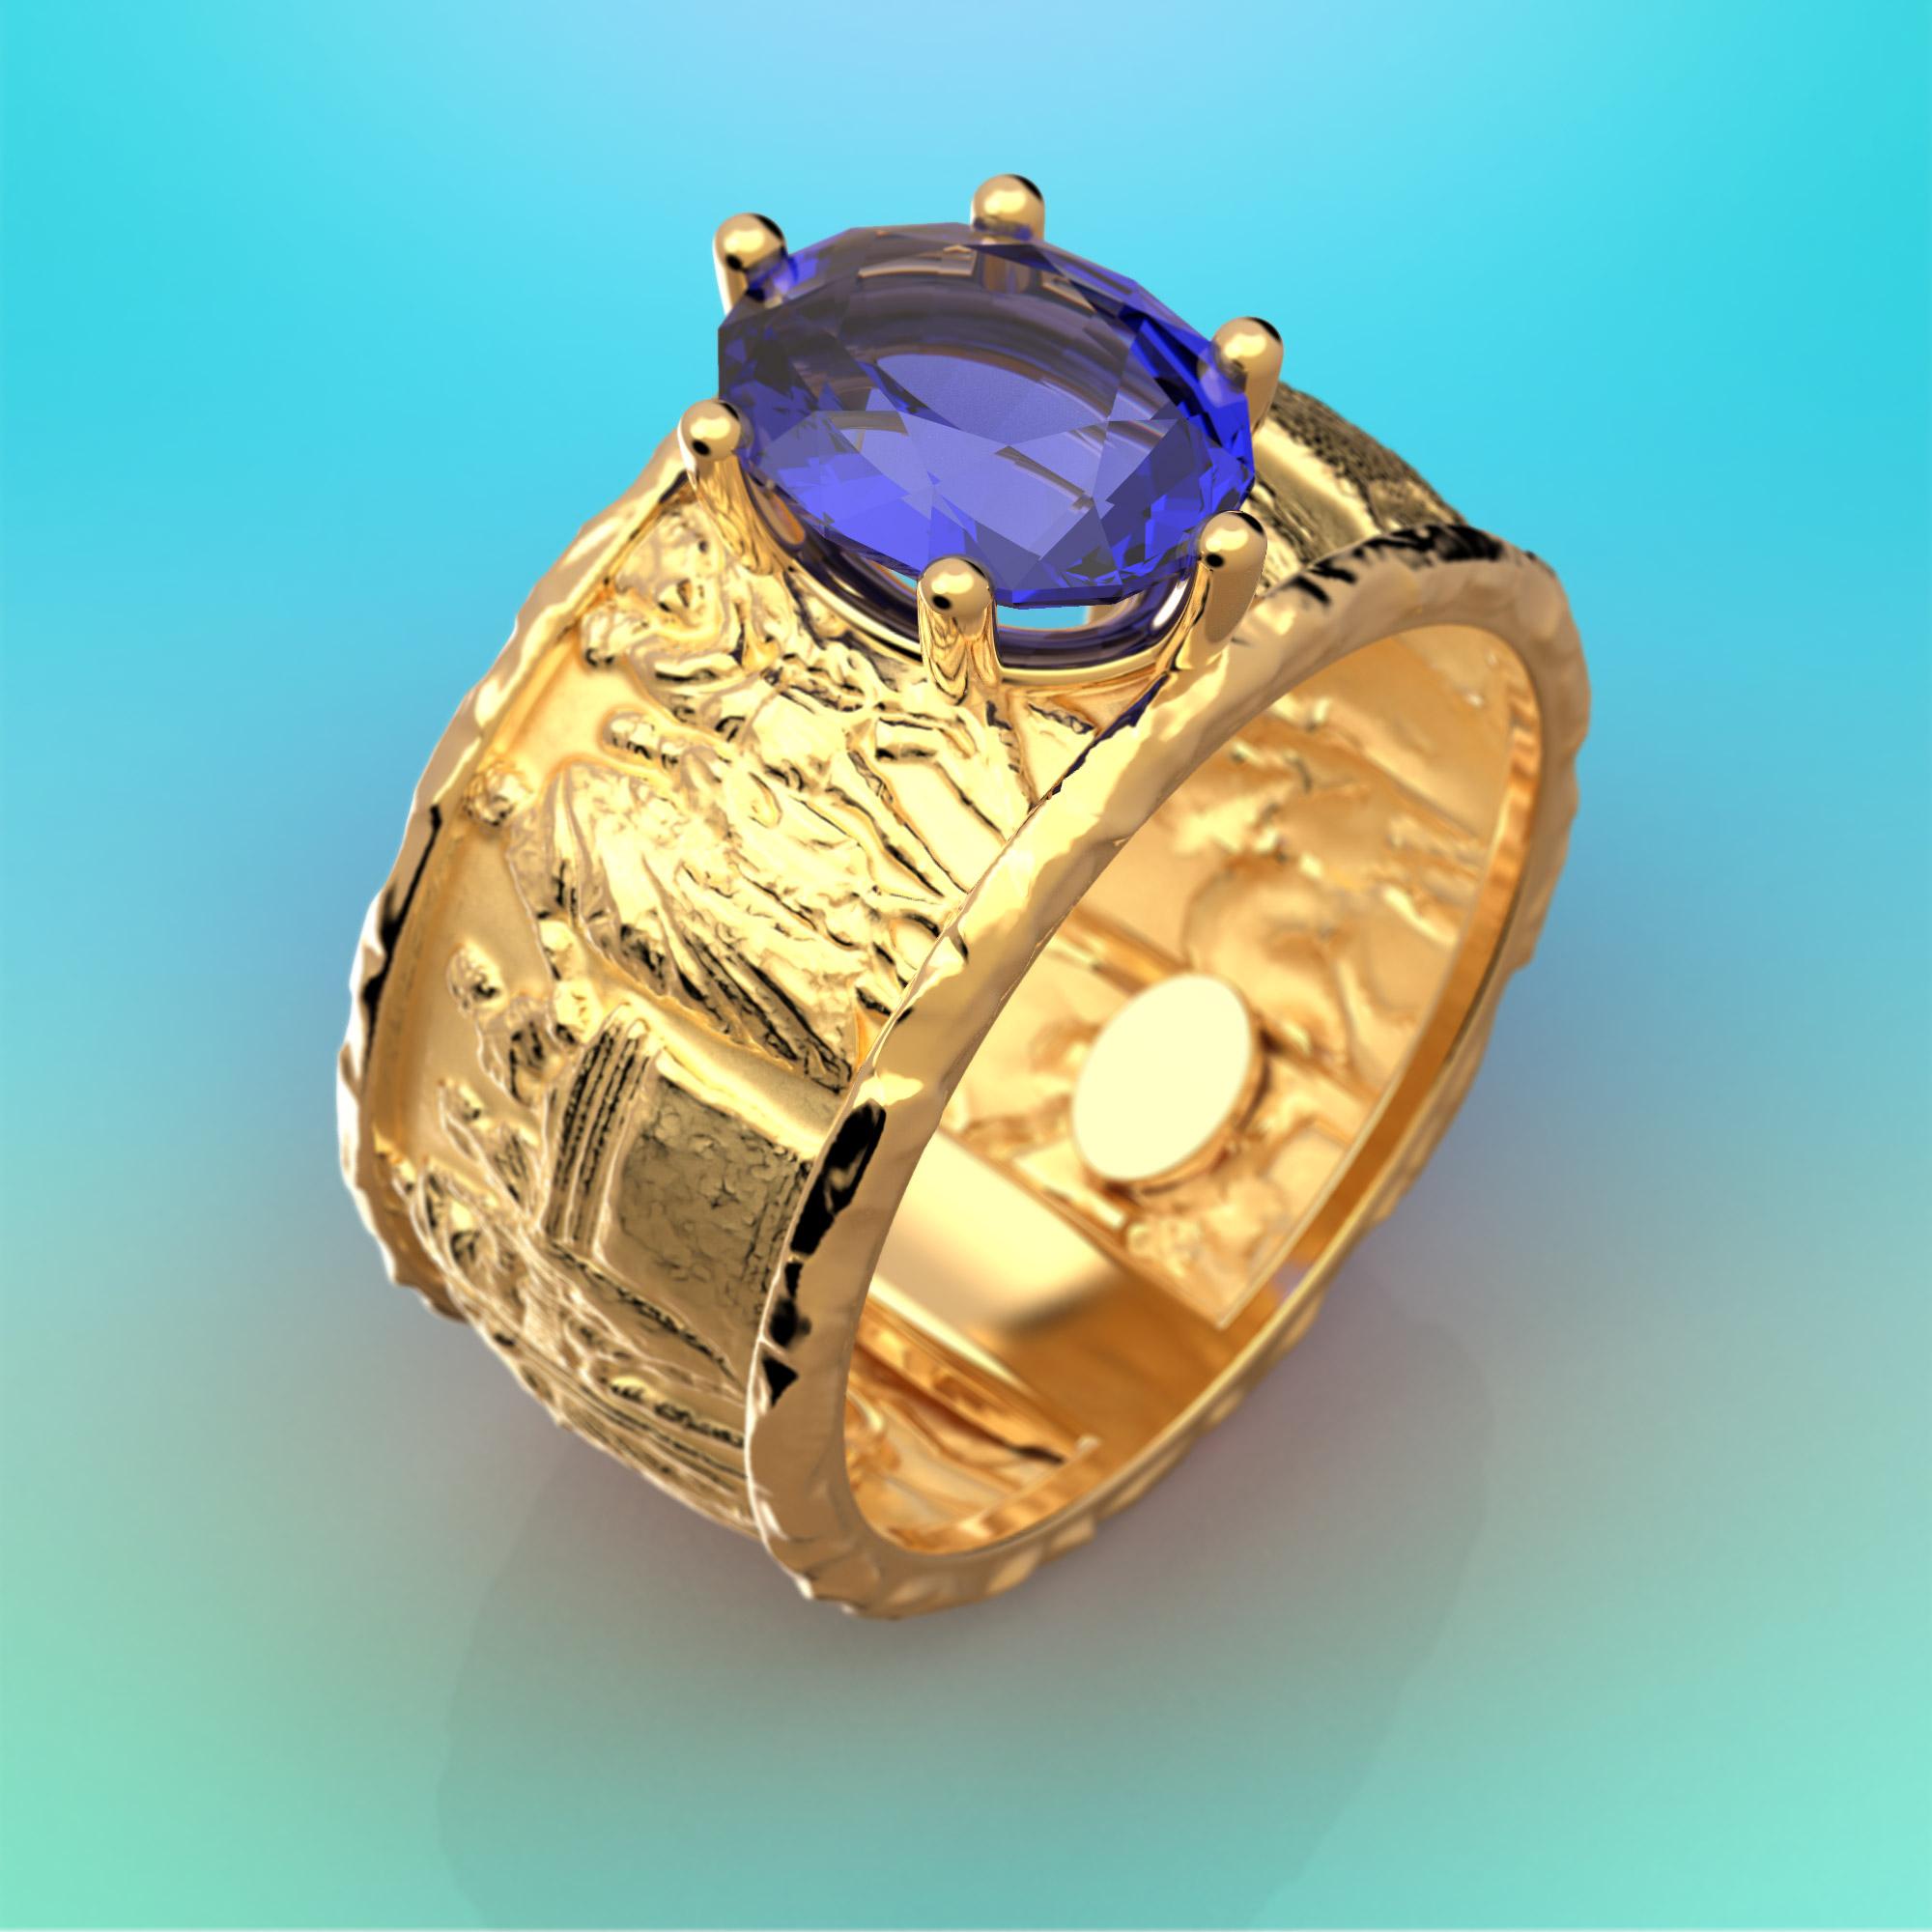 For Sale:  Tanzanite Gold Ring in 14k Solid Gold by Oltremare Gioielli Made in Italy 8